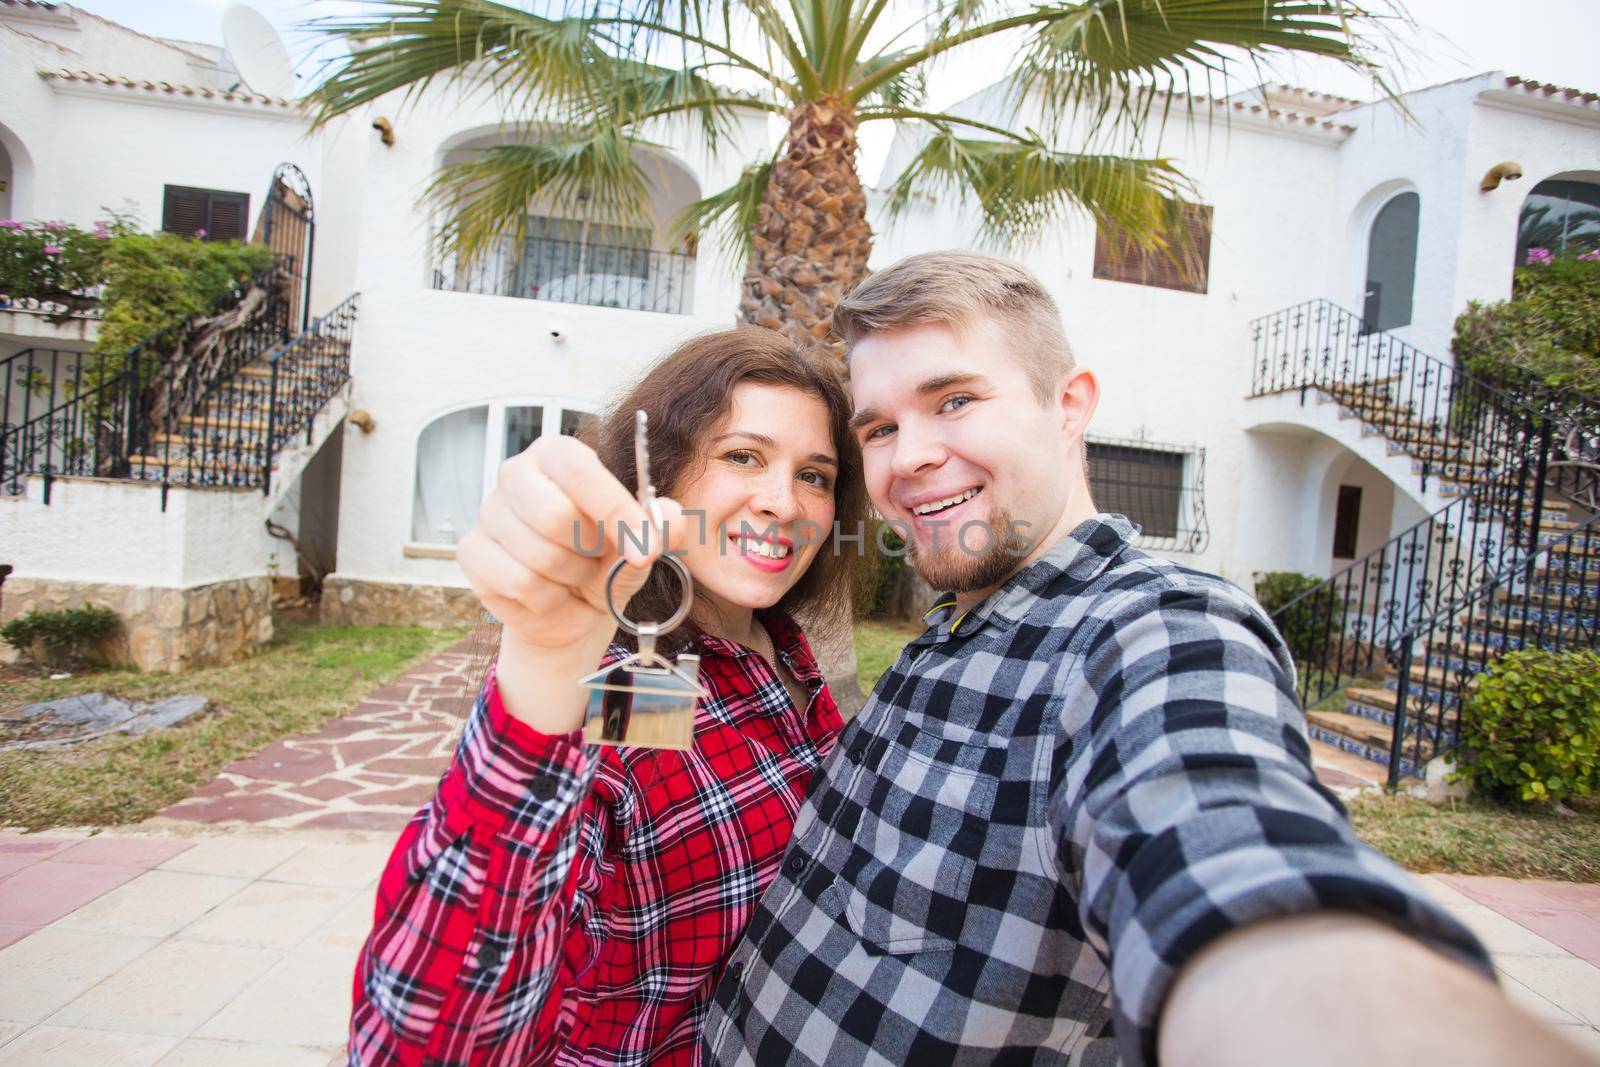 Moving and real estate concept - Happy young laughing cheerful couple man and woman holding their new home keys in front of a house